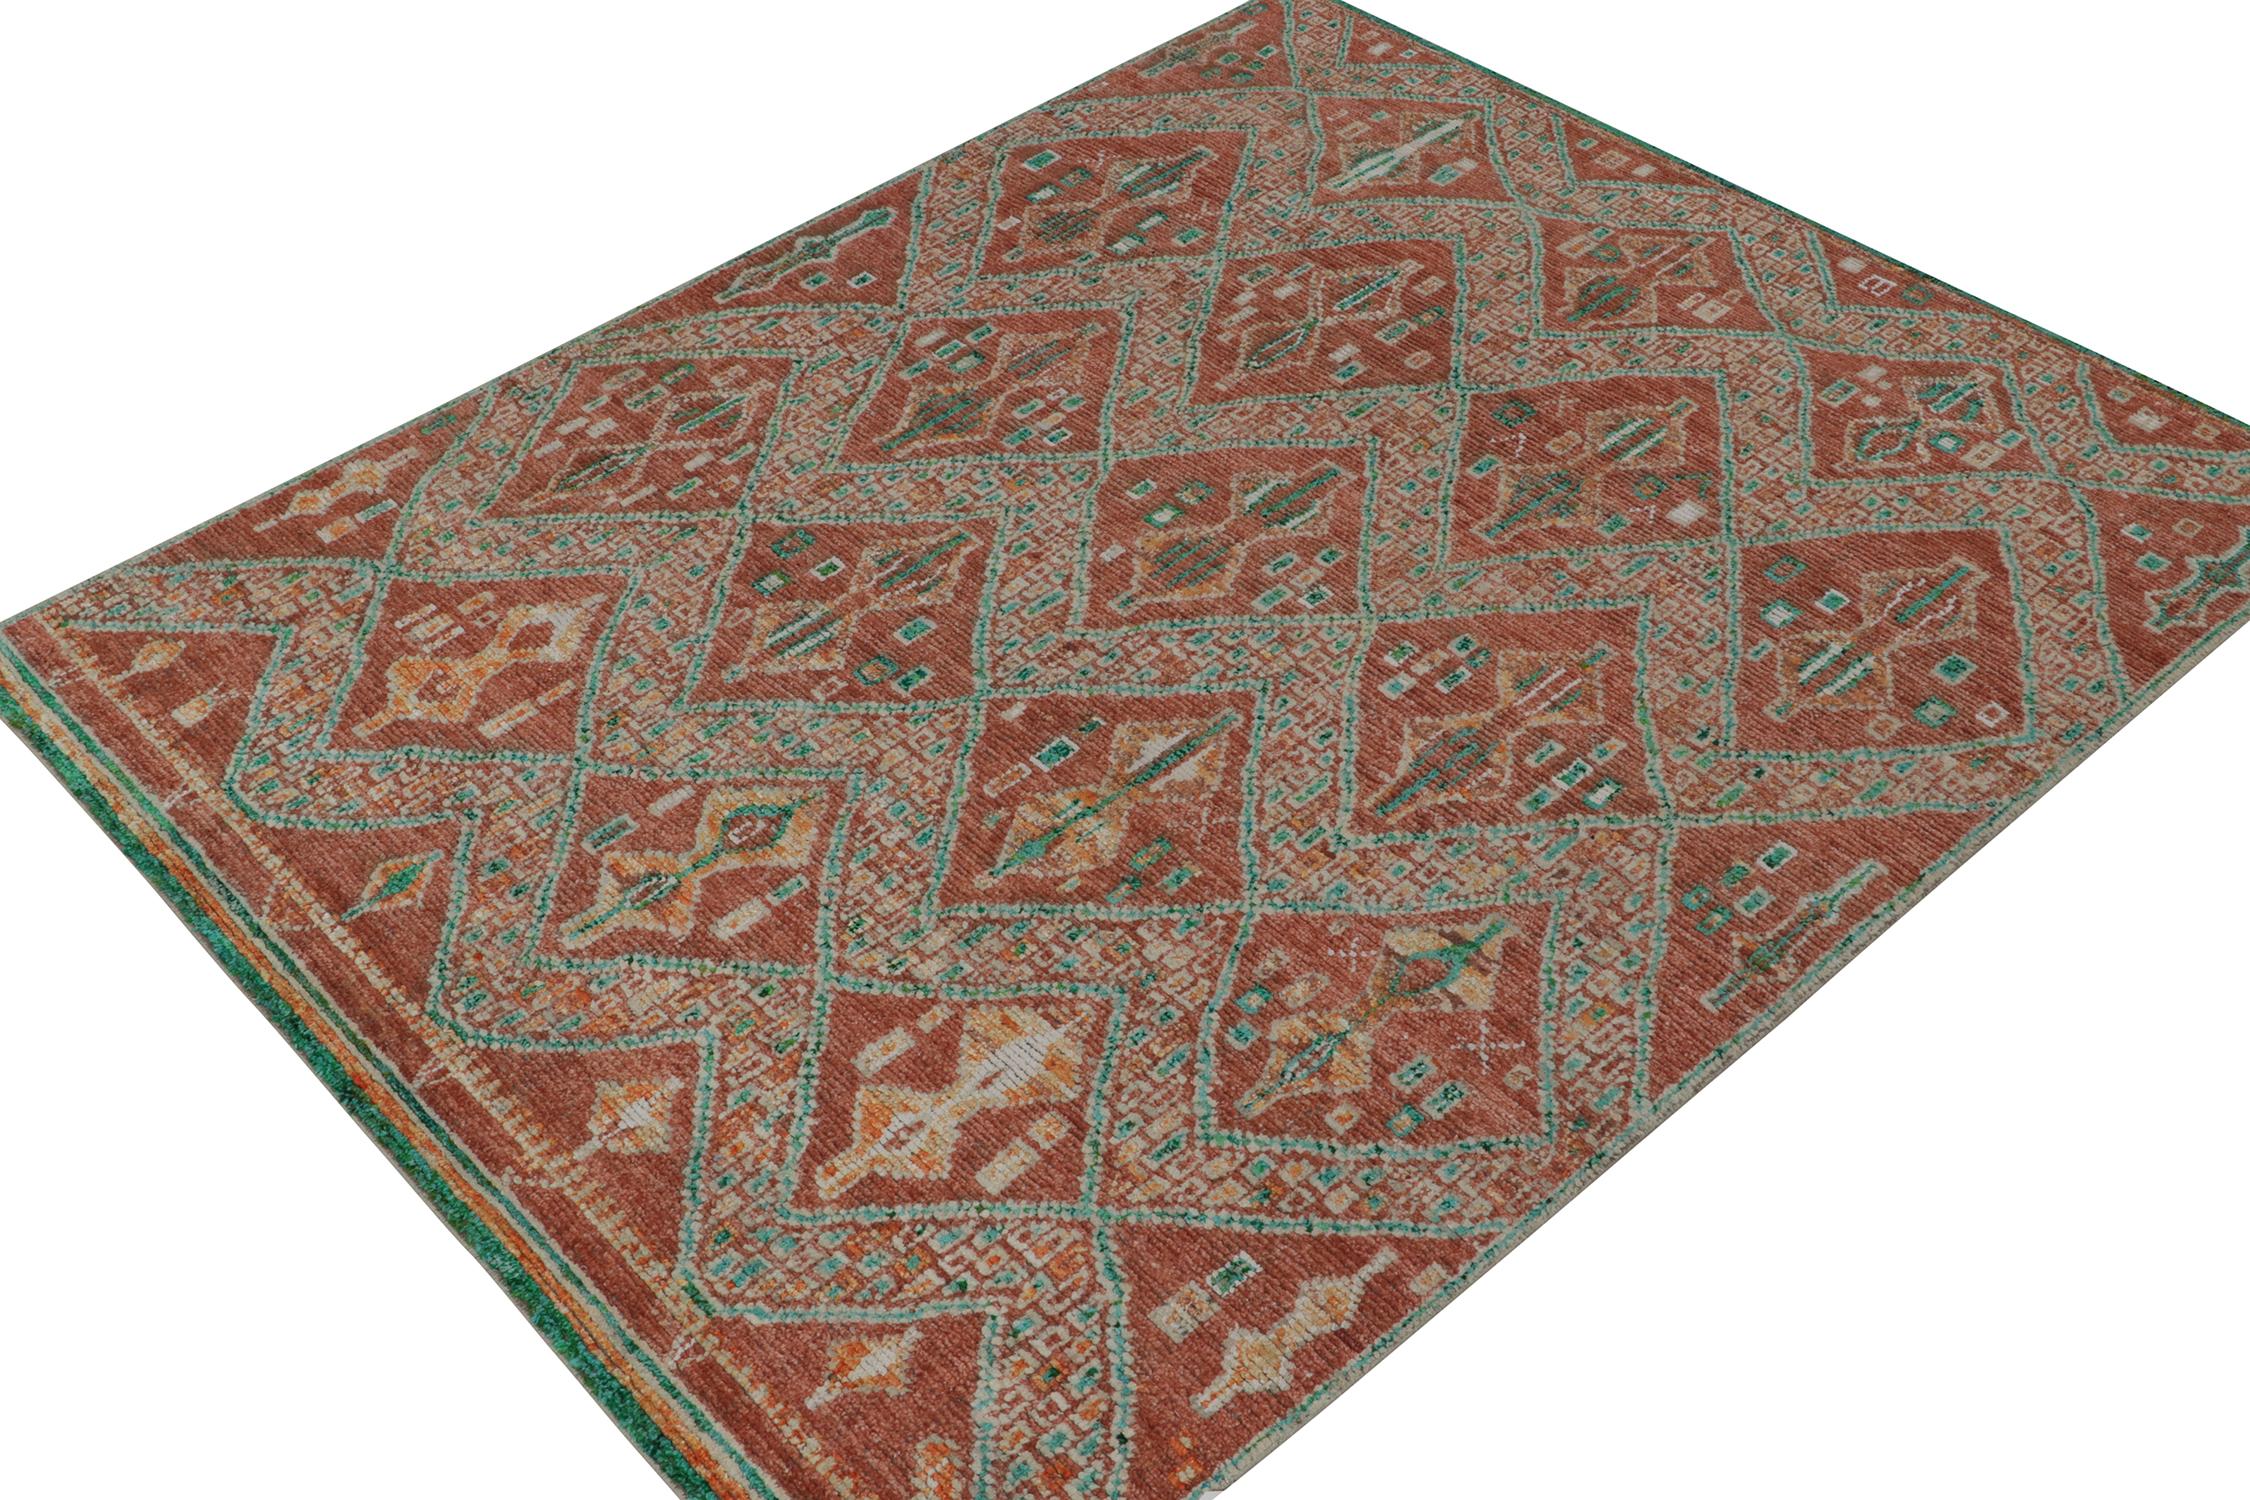 This contemporary 9x11 rug is a grand entry in Rug & Kilim's new Moroccan Collection—a bold take on the iconic style. Hand-knotted in wool, silk, and cotton.
Further on the Design:
The piece draws on archaic lozenges and chevrons in rust red and